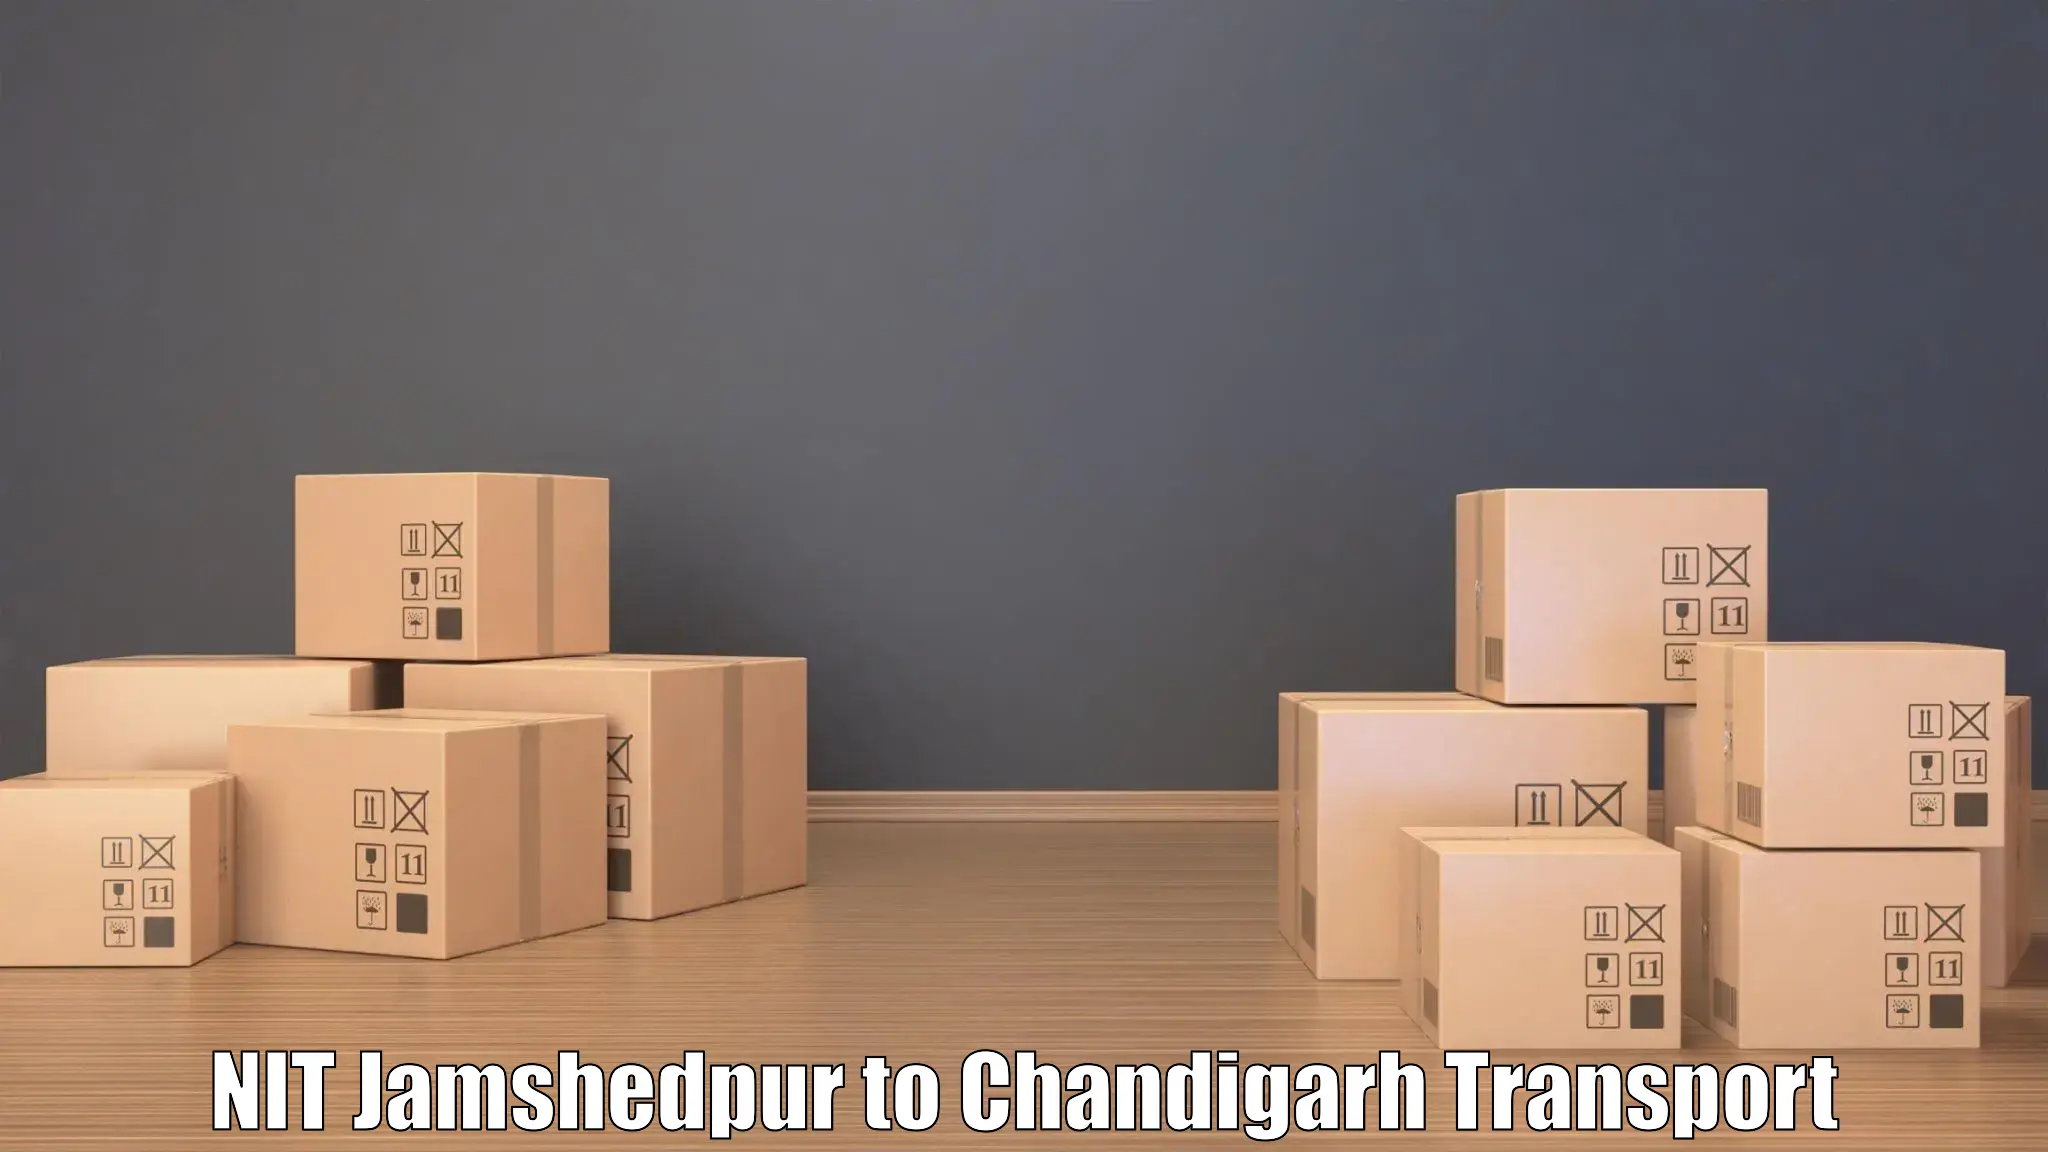 Lorry transport service in NIT Jamshedpur to Chandigarh